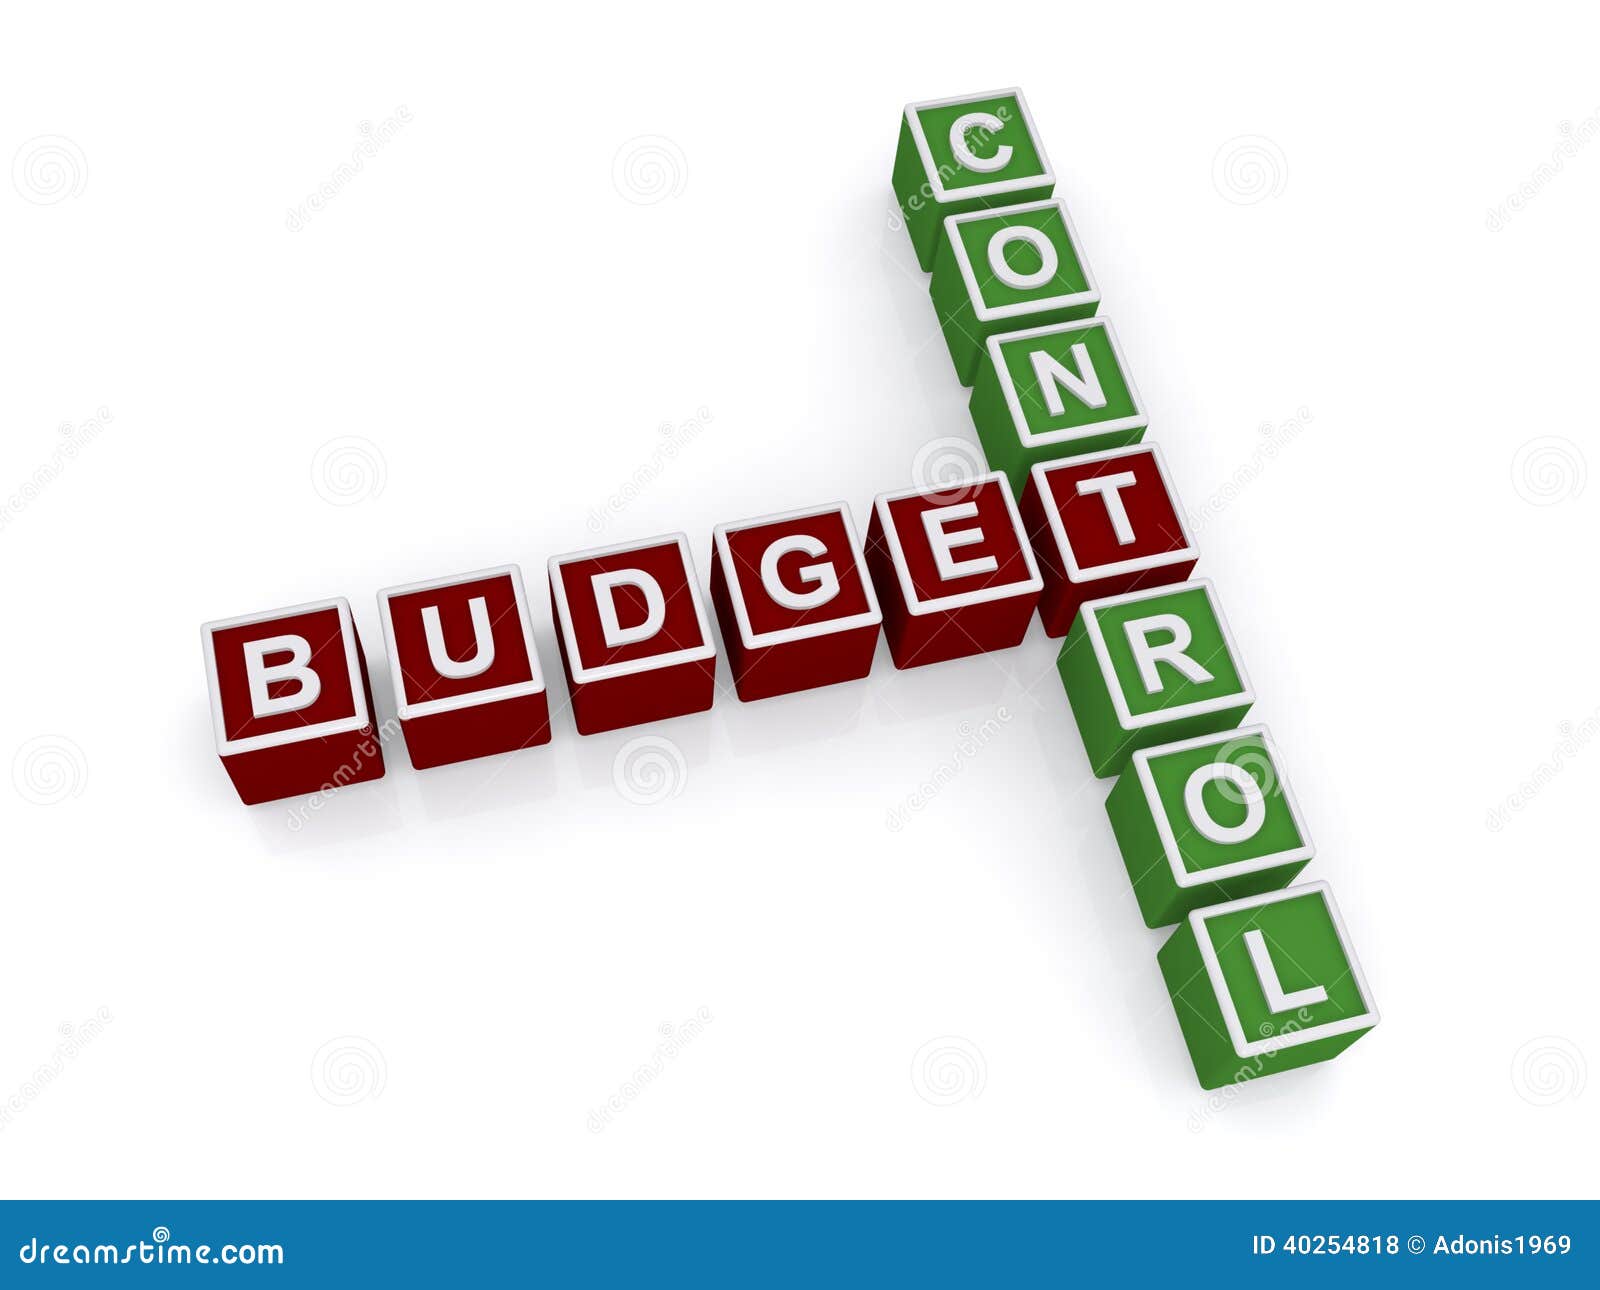 Identify and explain the key principles of budgetary control